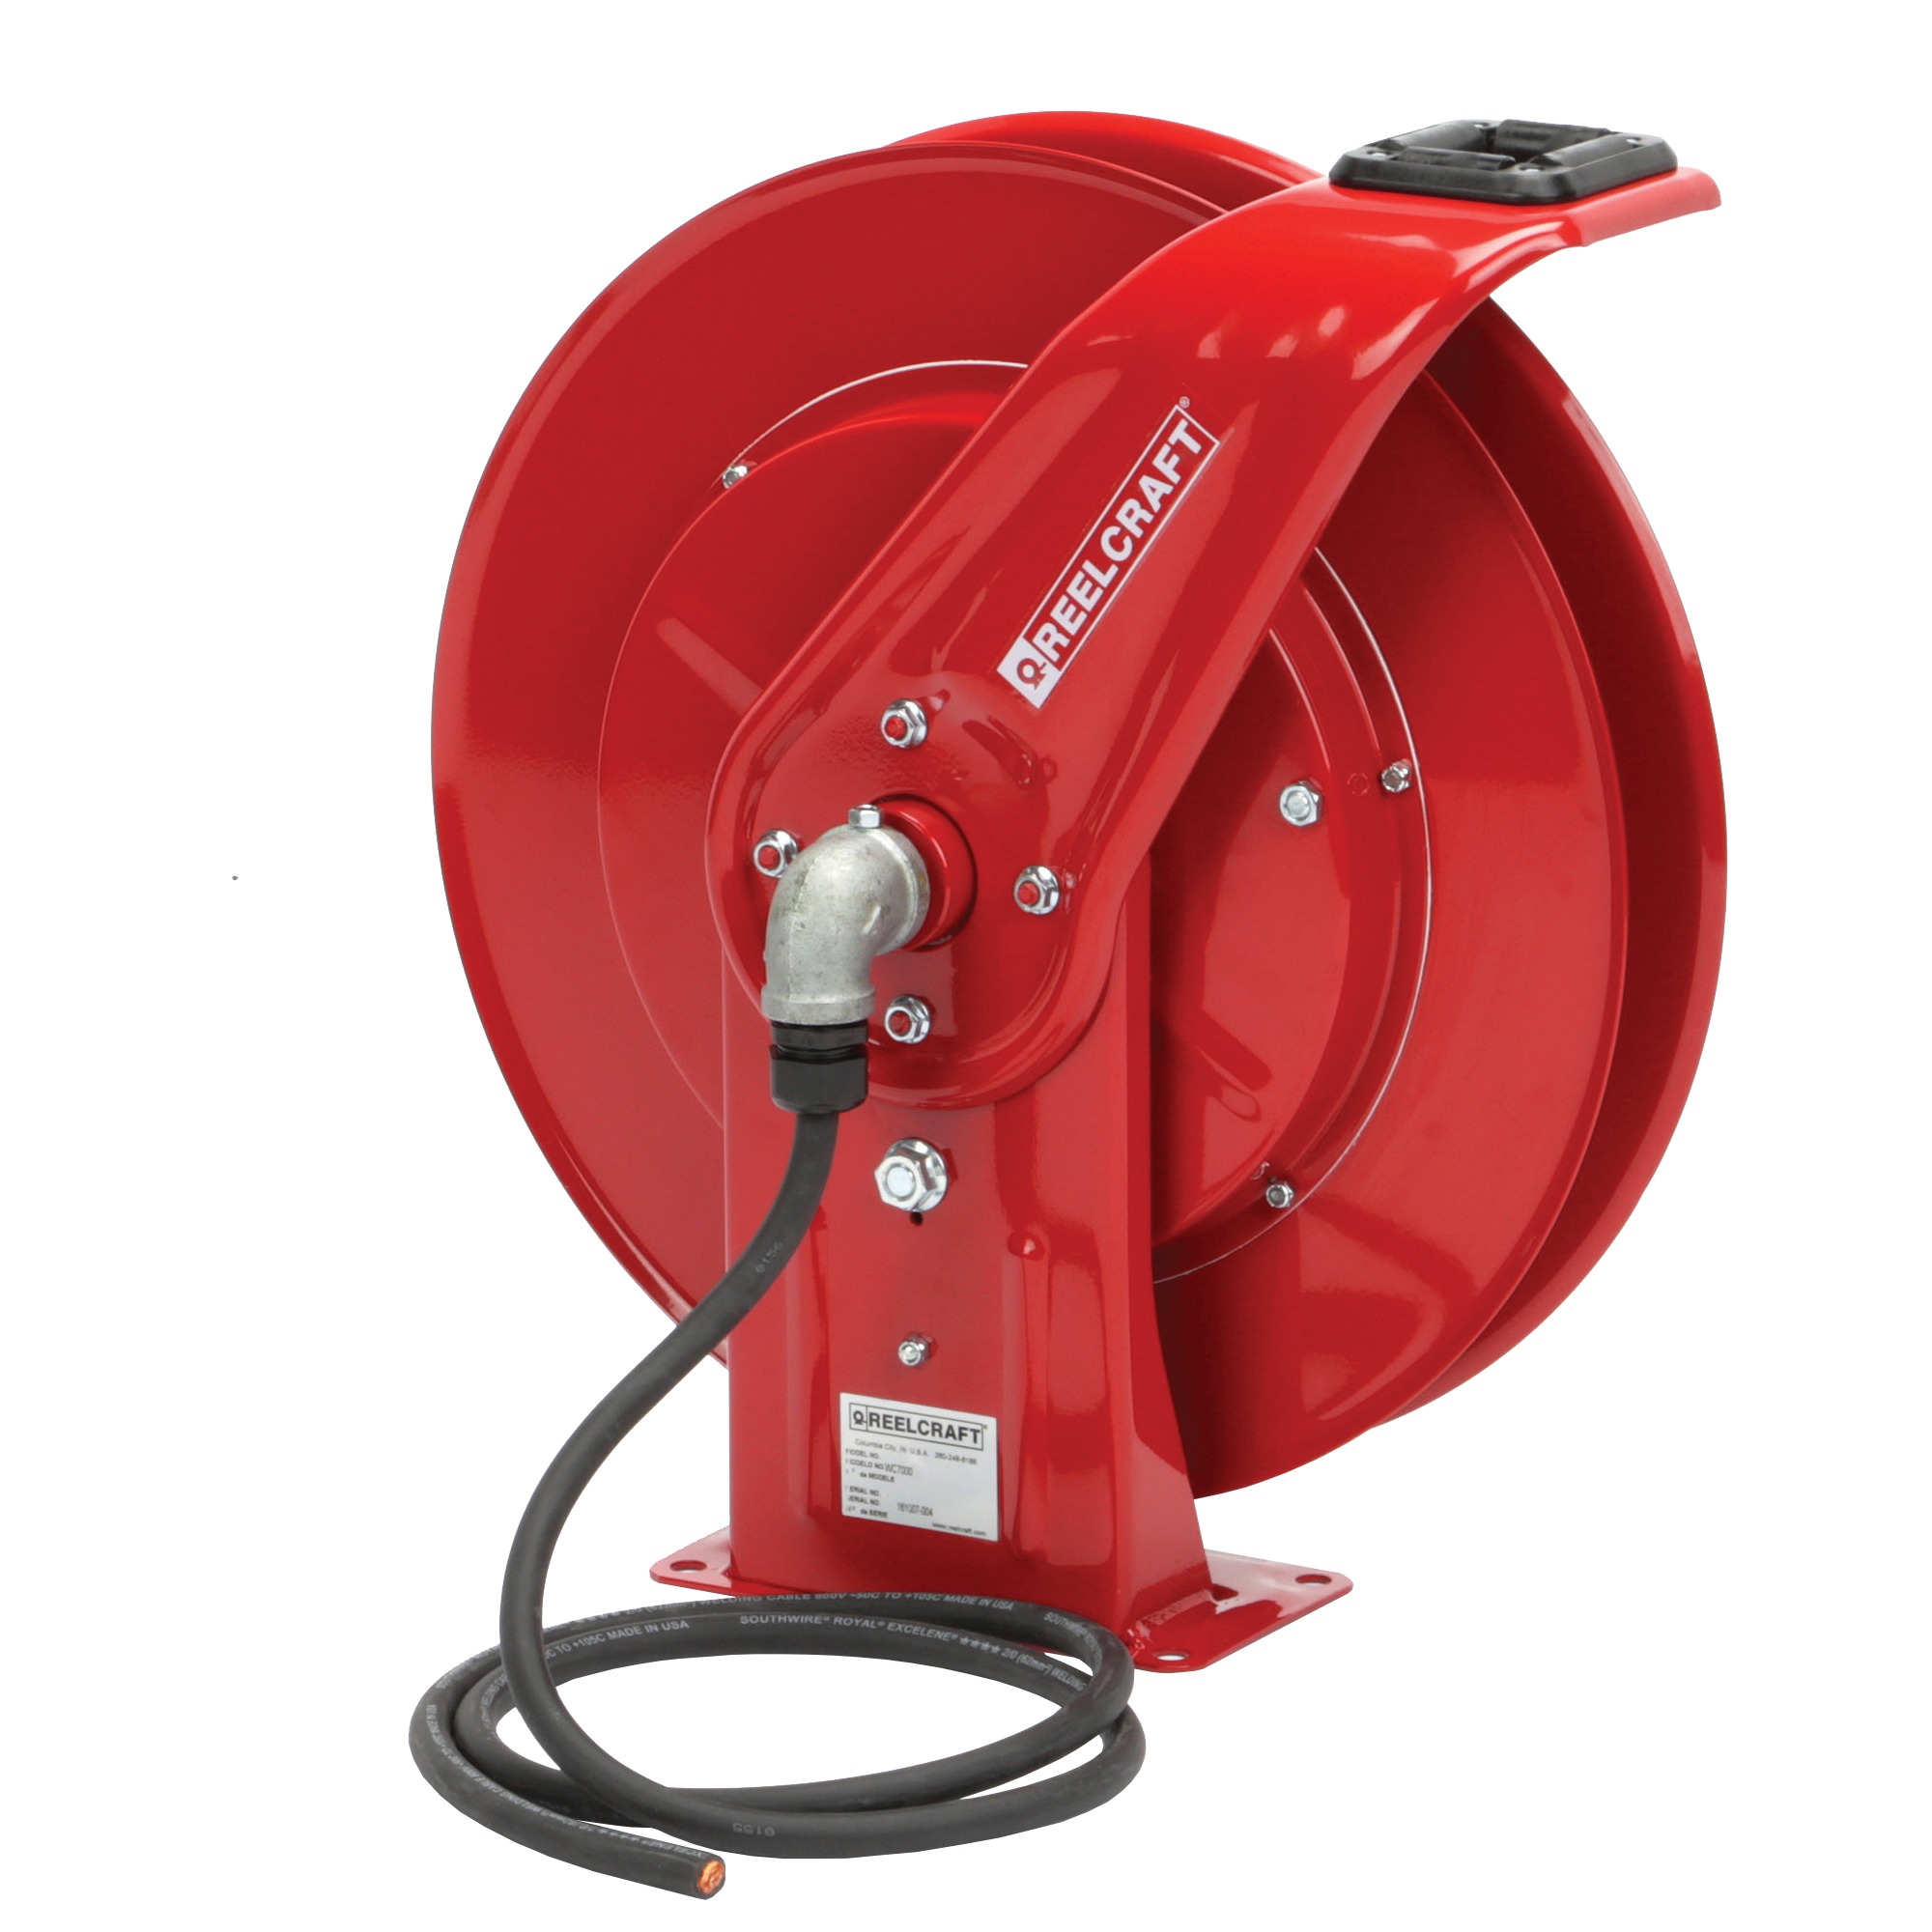 WC7000 - Premium Duty 400 Amp Cable Welding Reel - Hose, Cord and Cable  Reels - Reelcraft